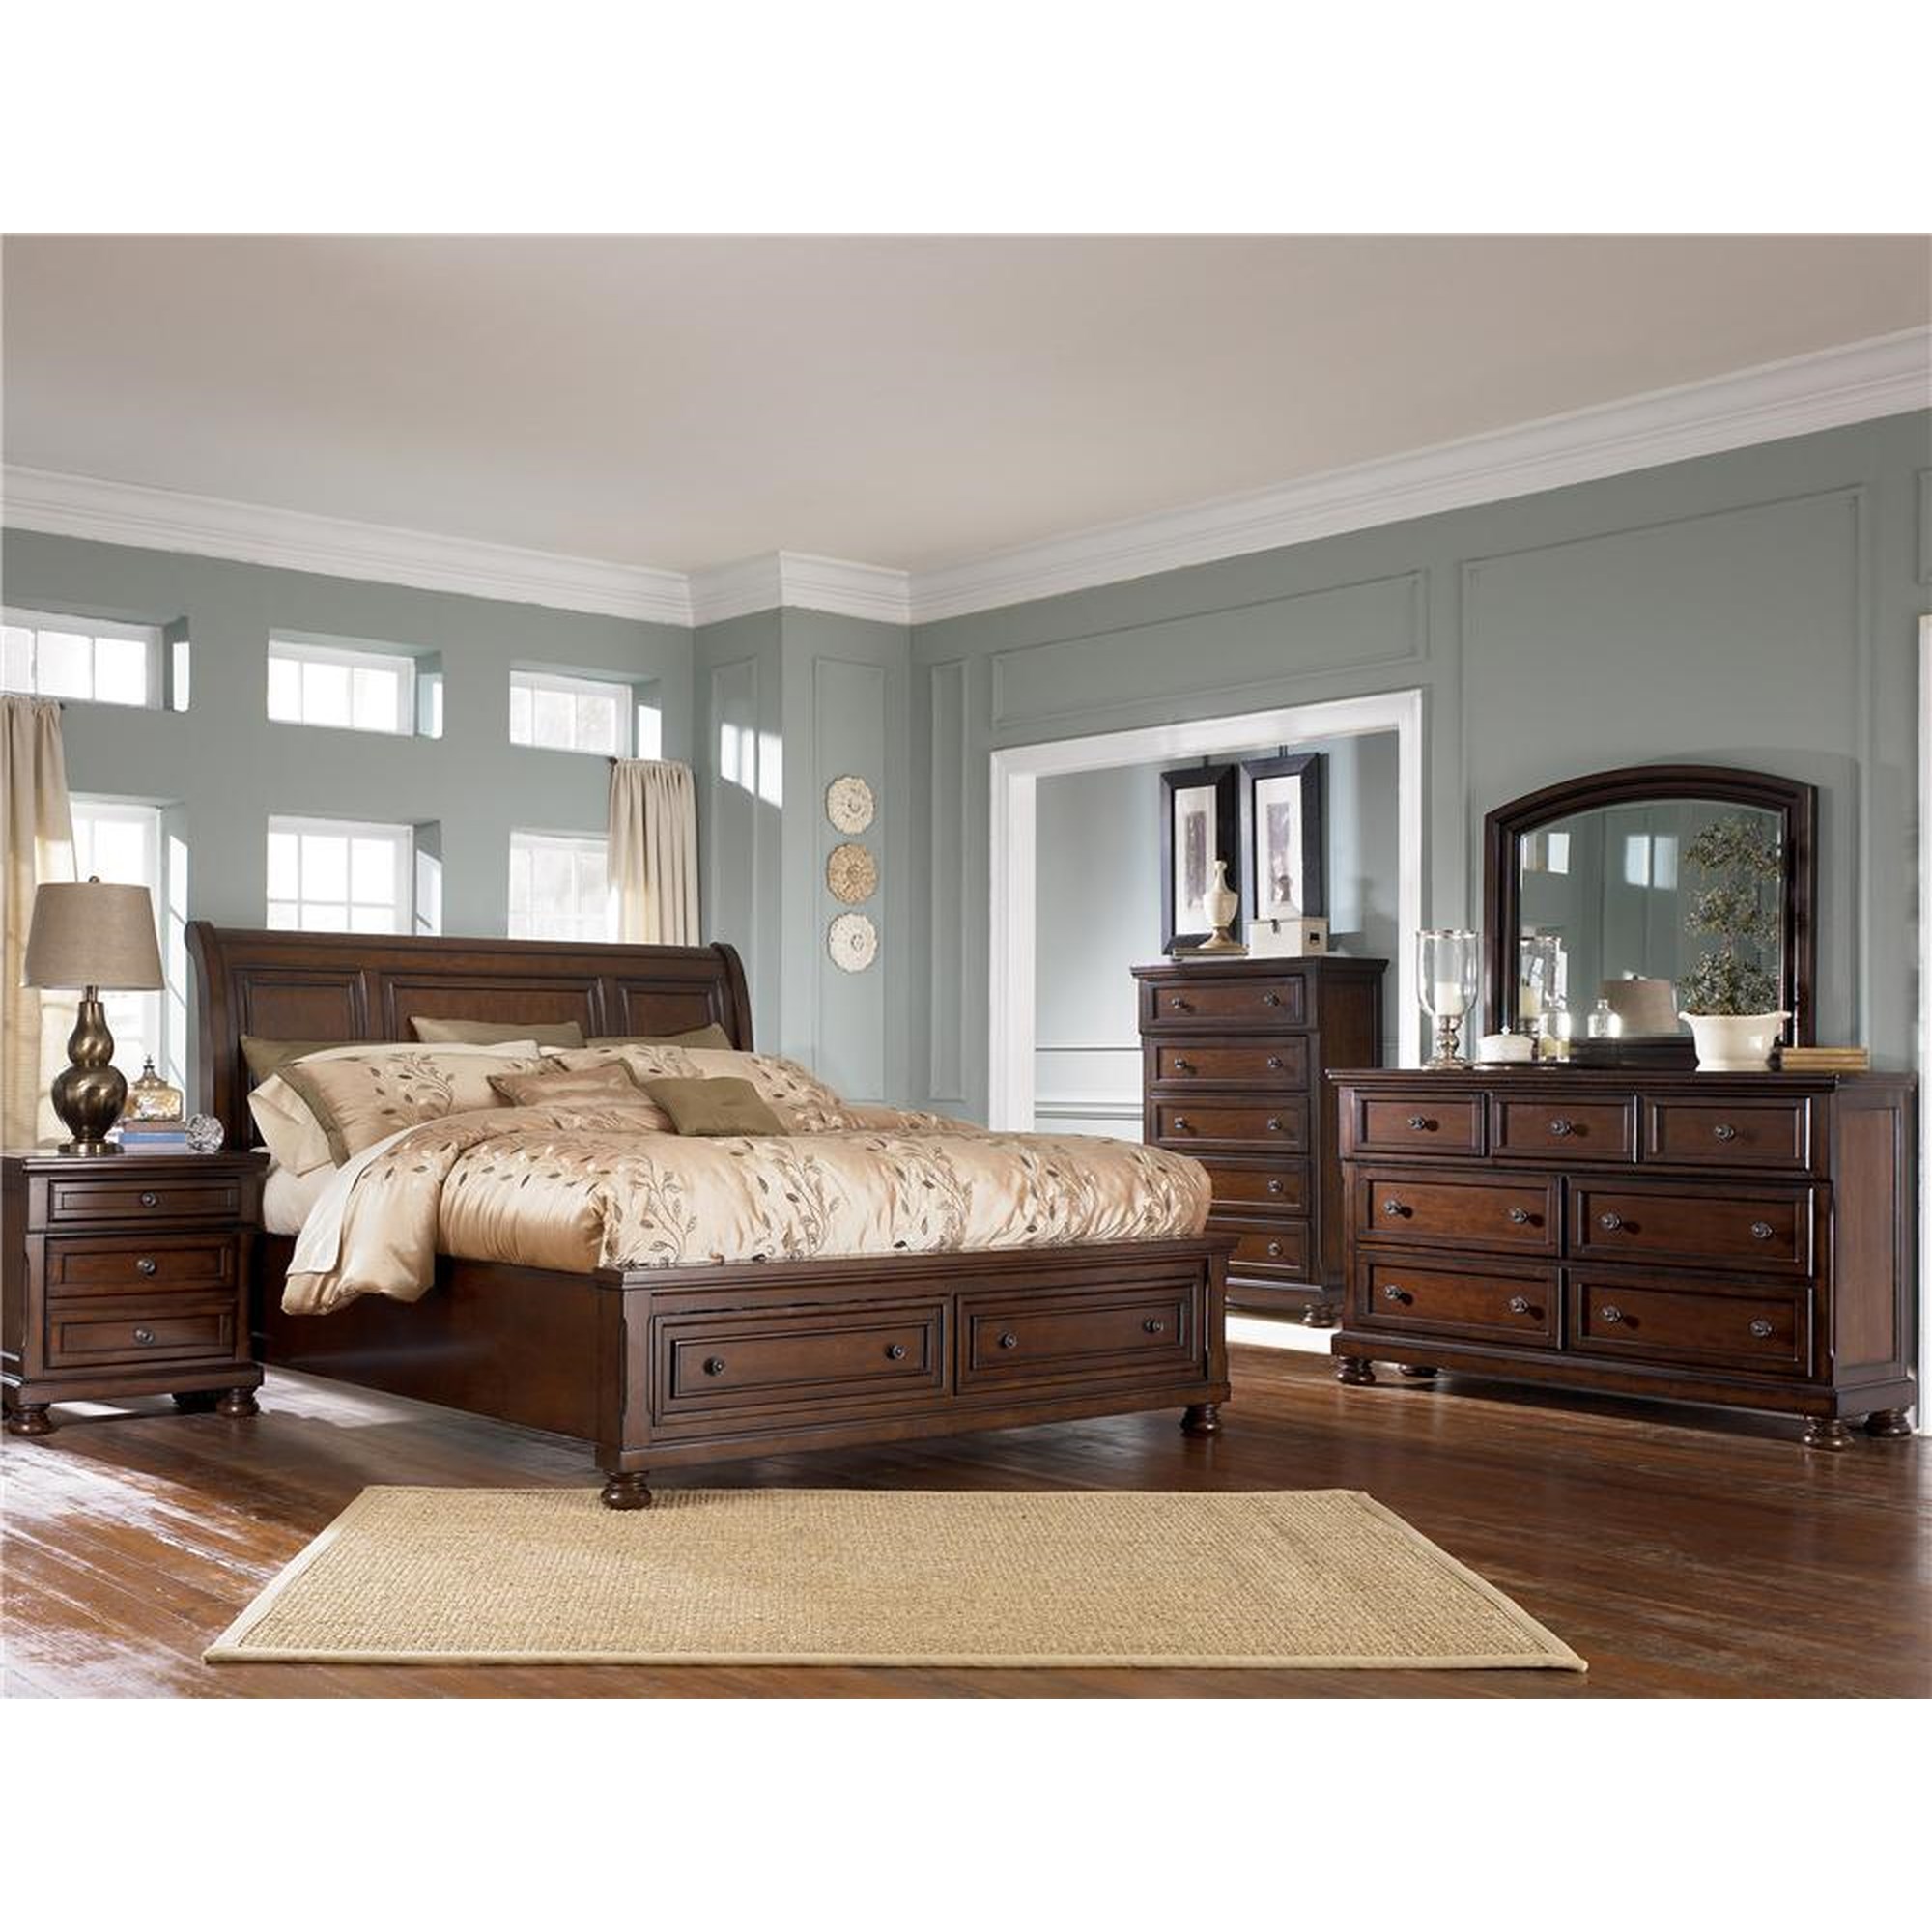 undefined  Rooms to go furniture, Rooms to go, Furniture outlet